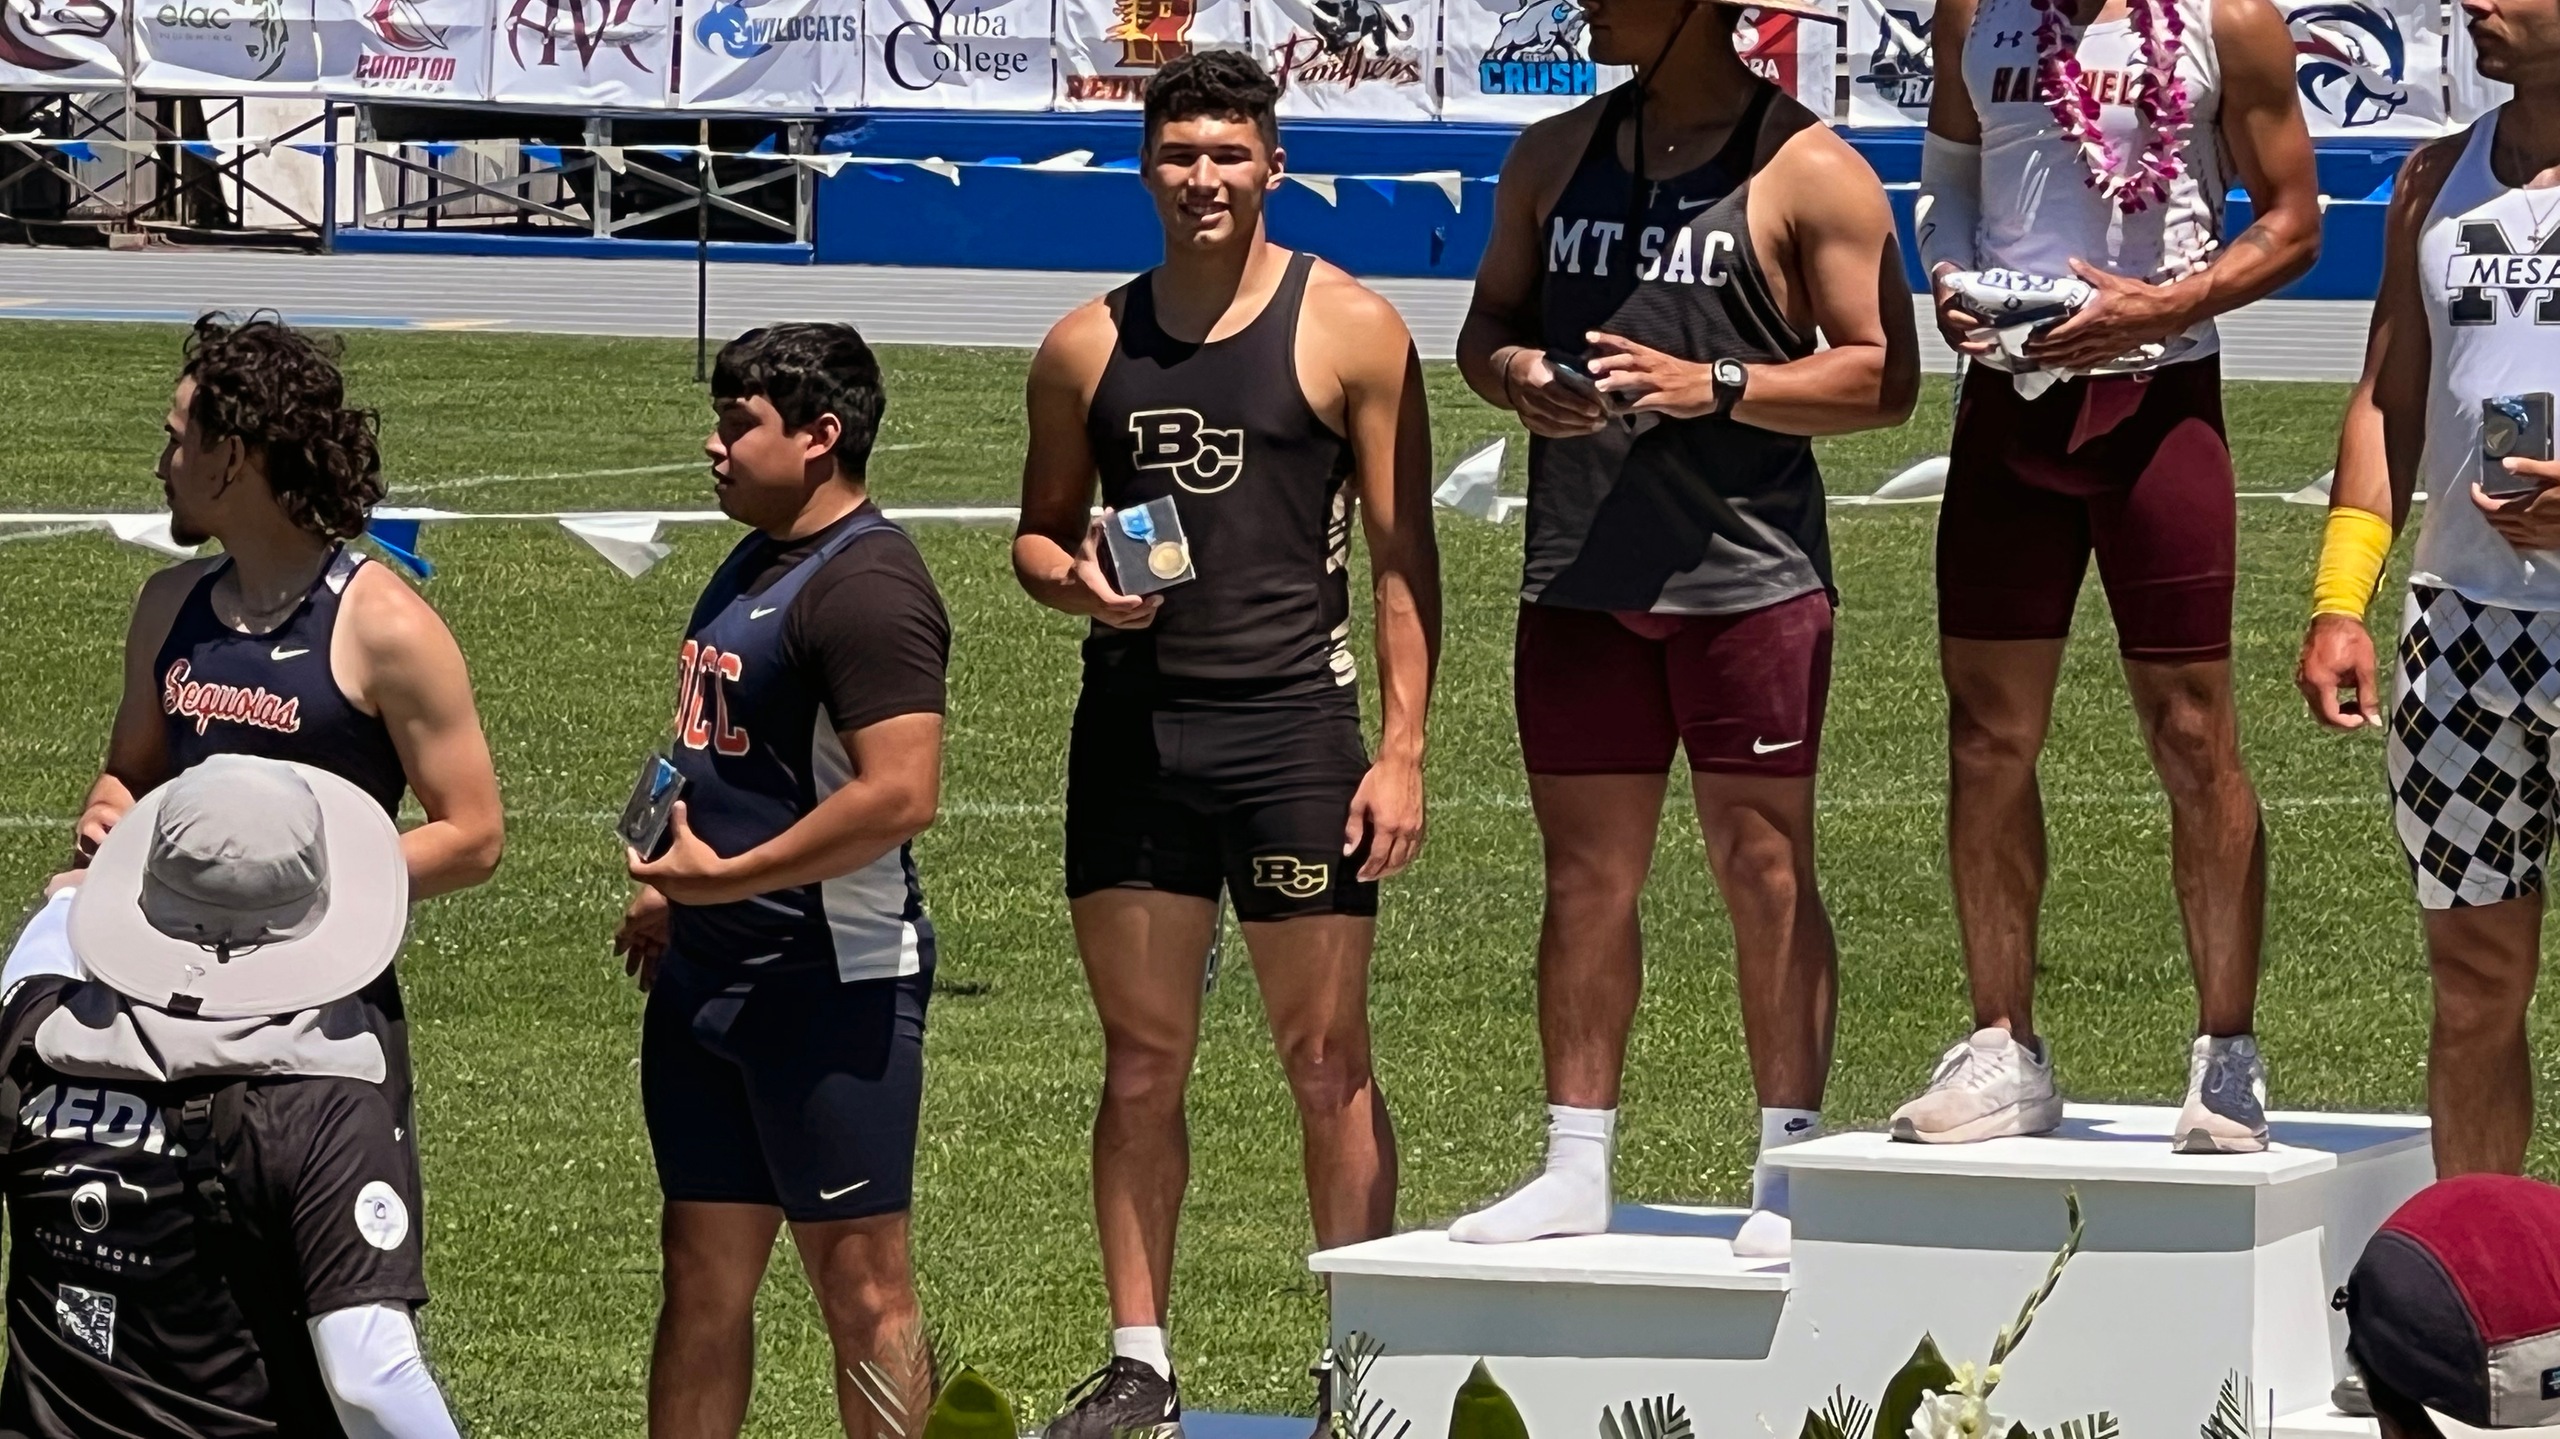 Smith Named All-American to Lead Track and Field at State Championships